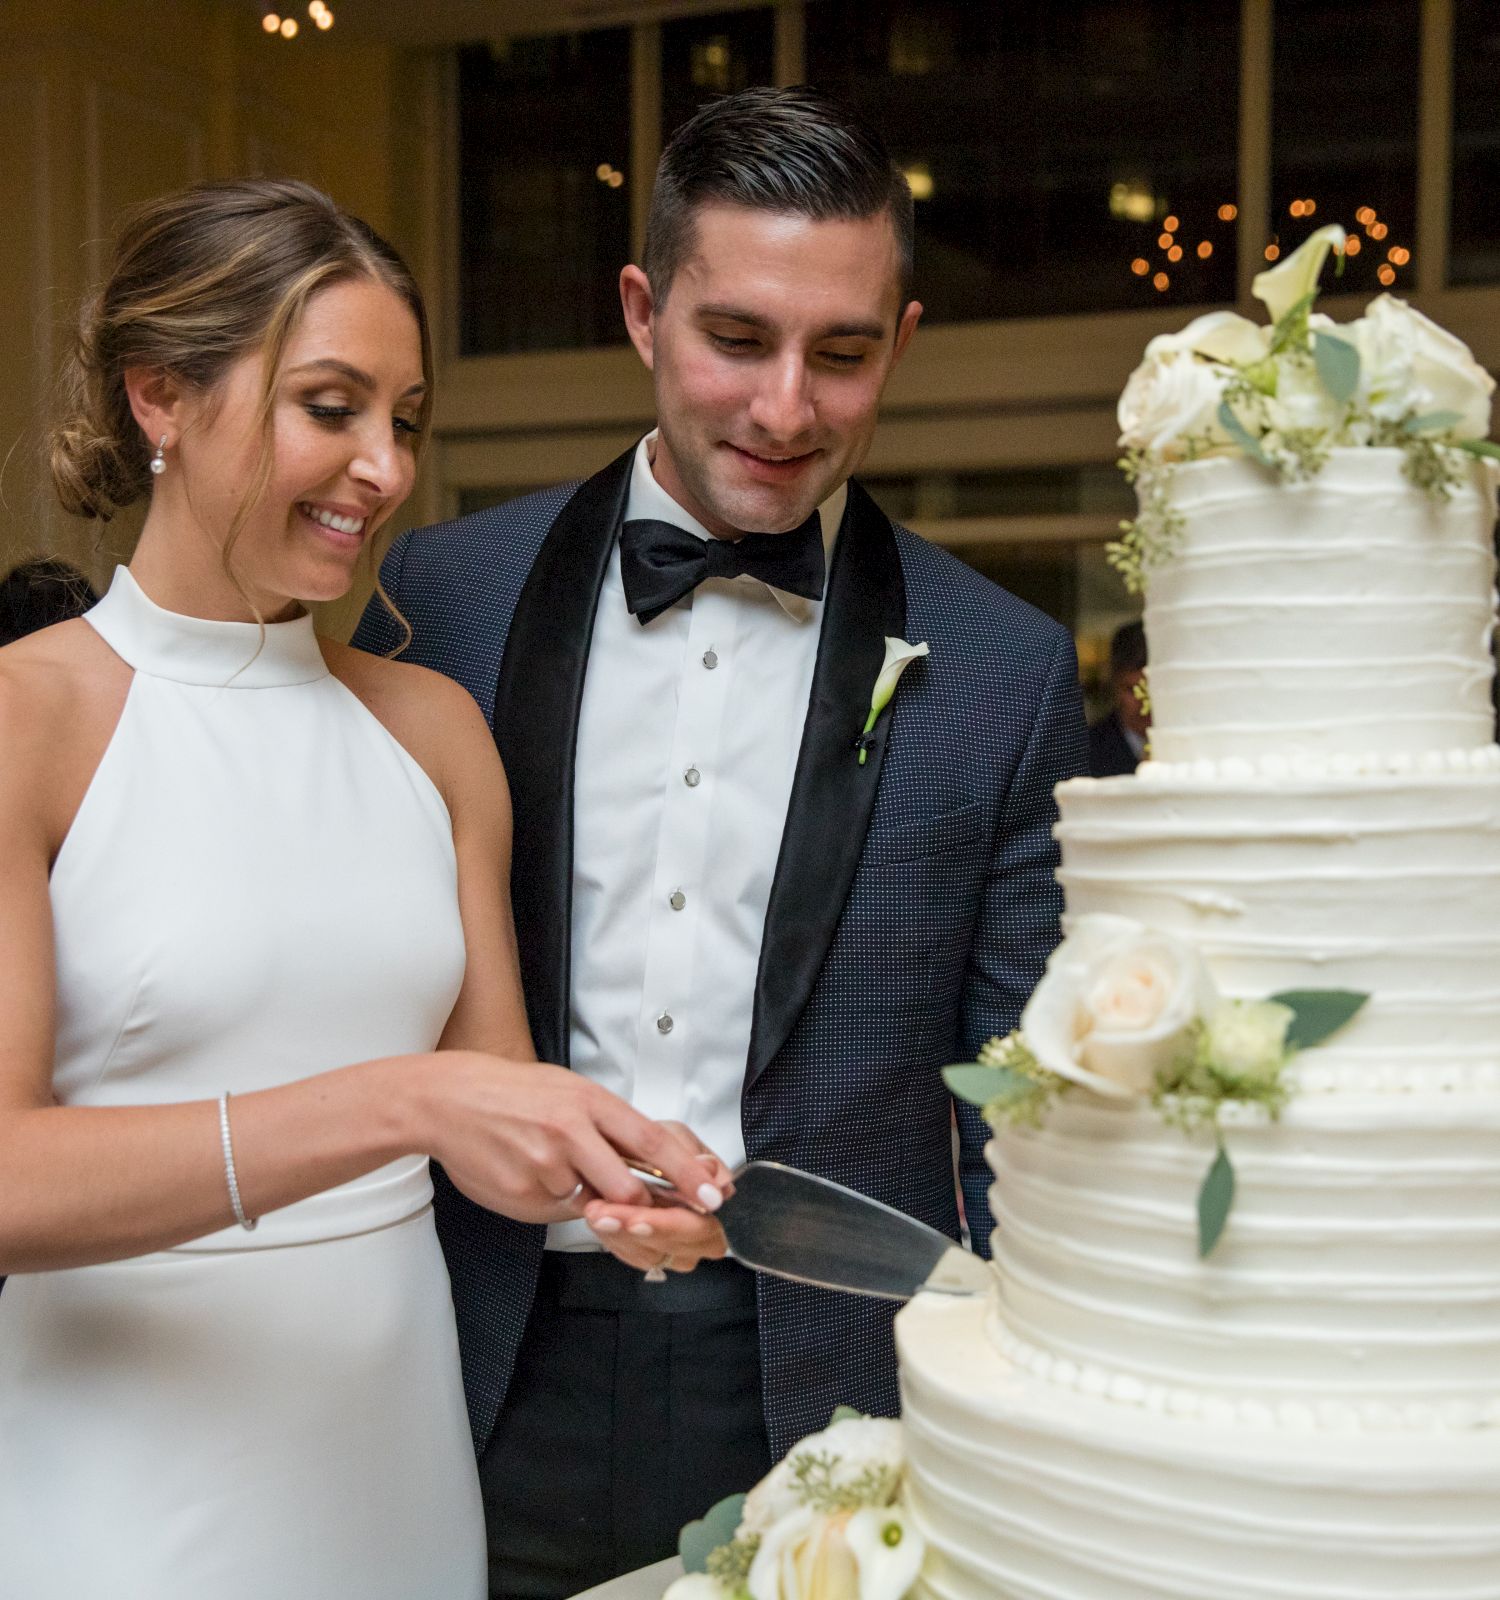 A couple is cutting a wedding cake together, smiling.